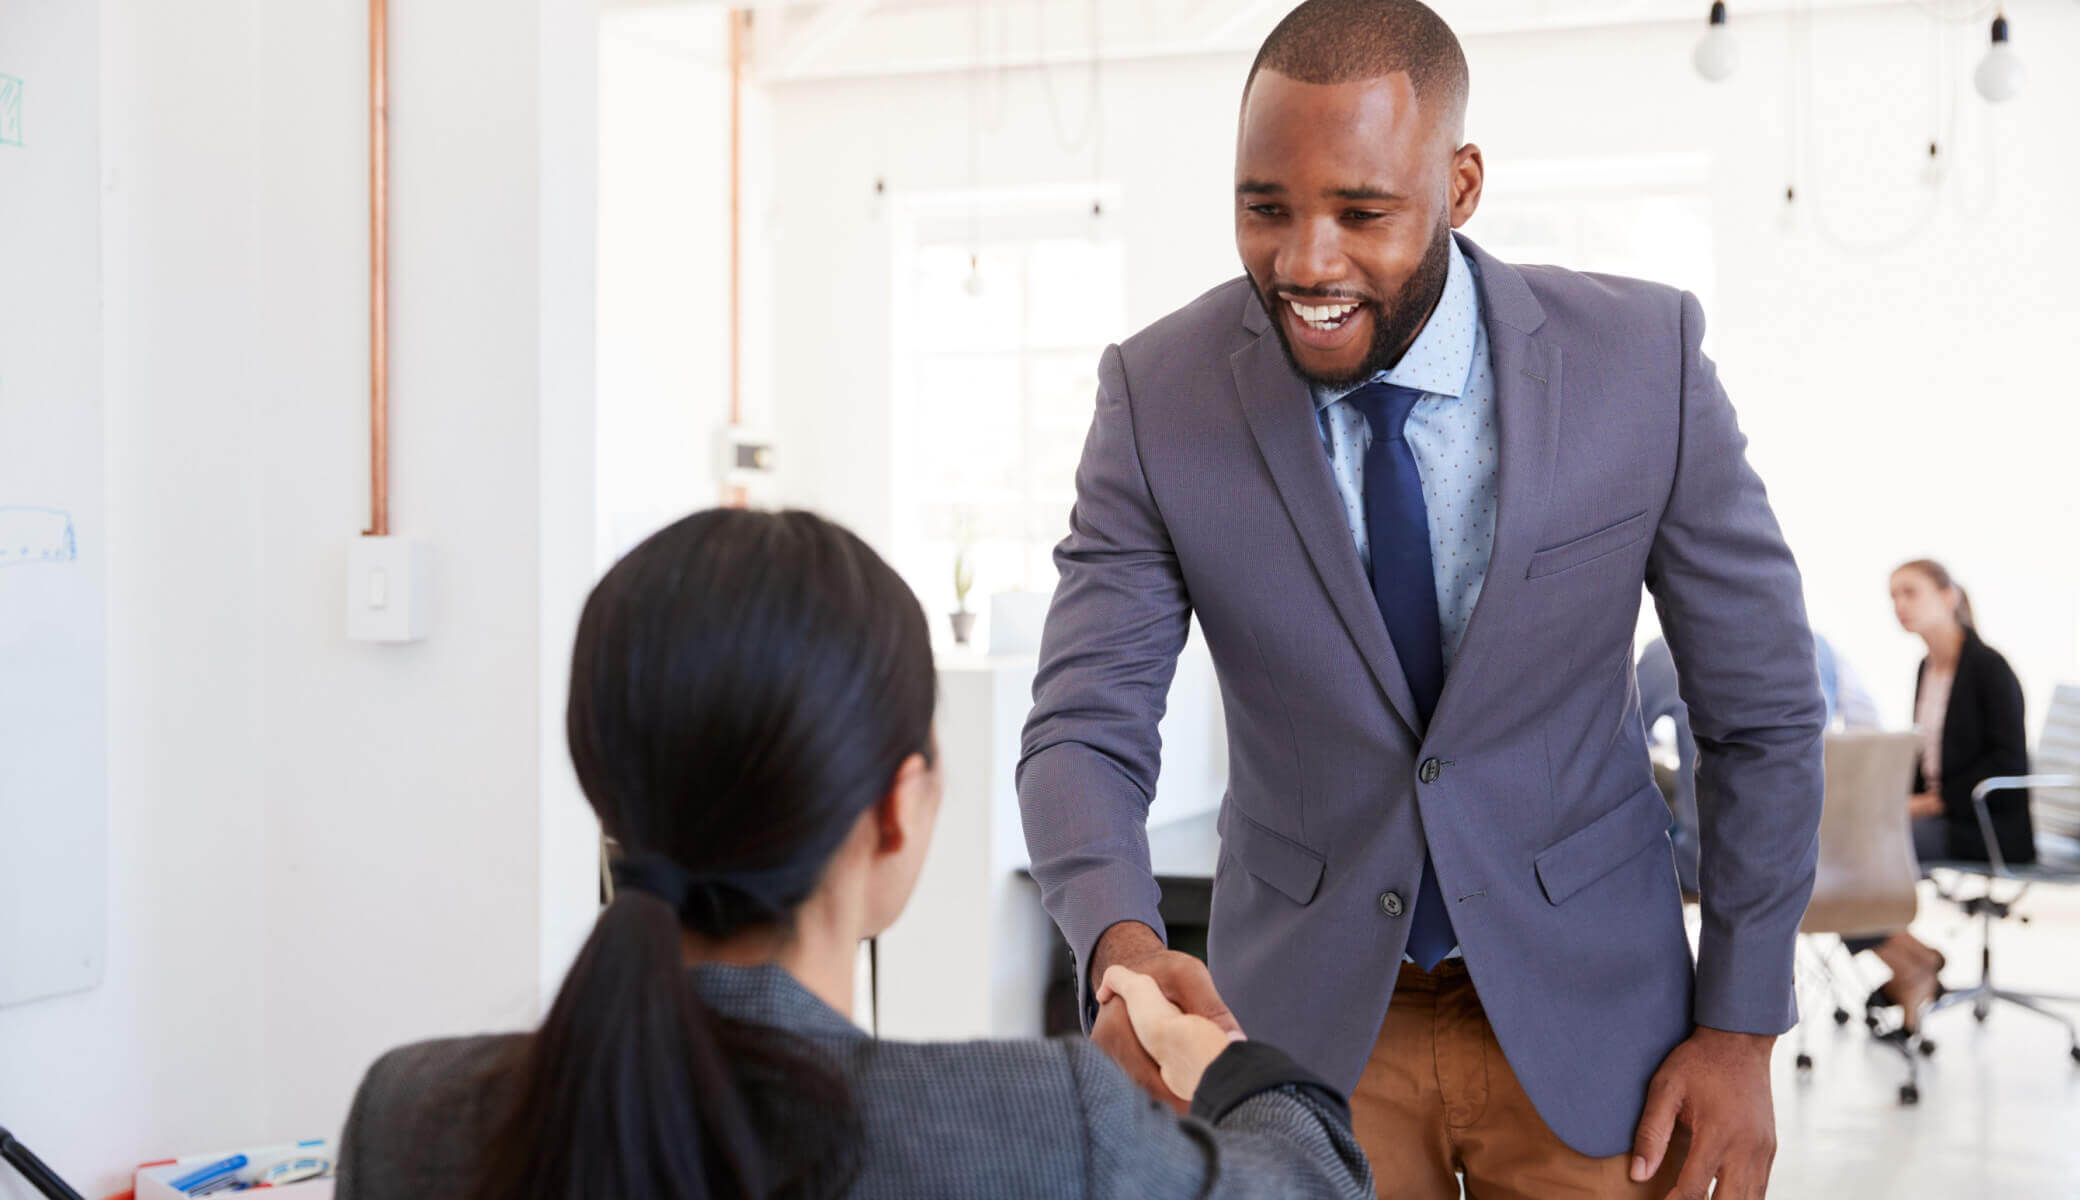 10 Interview Tips to Improve Your Shot at Getting Hired